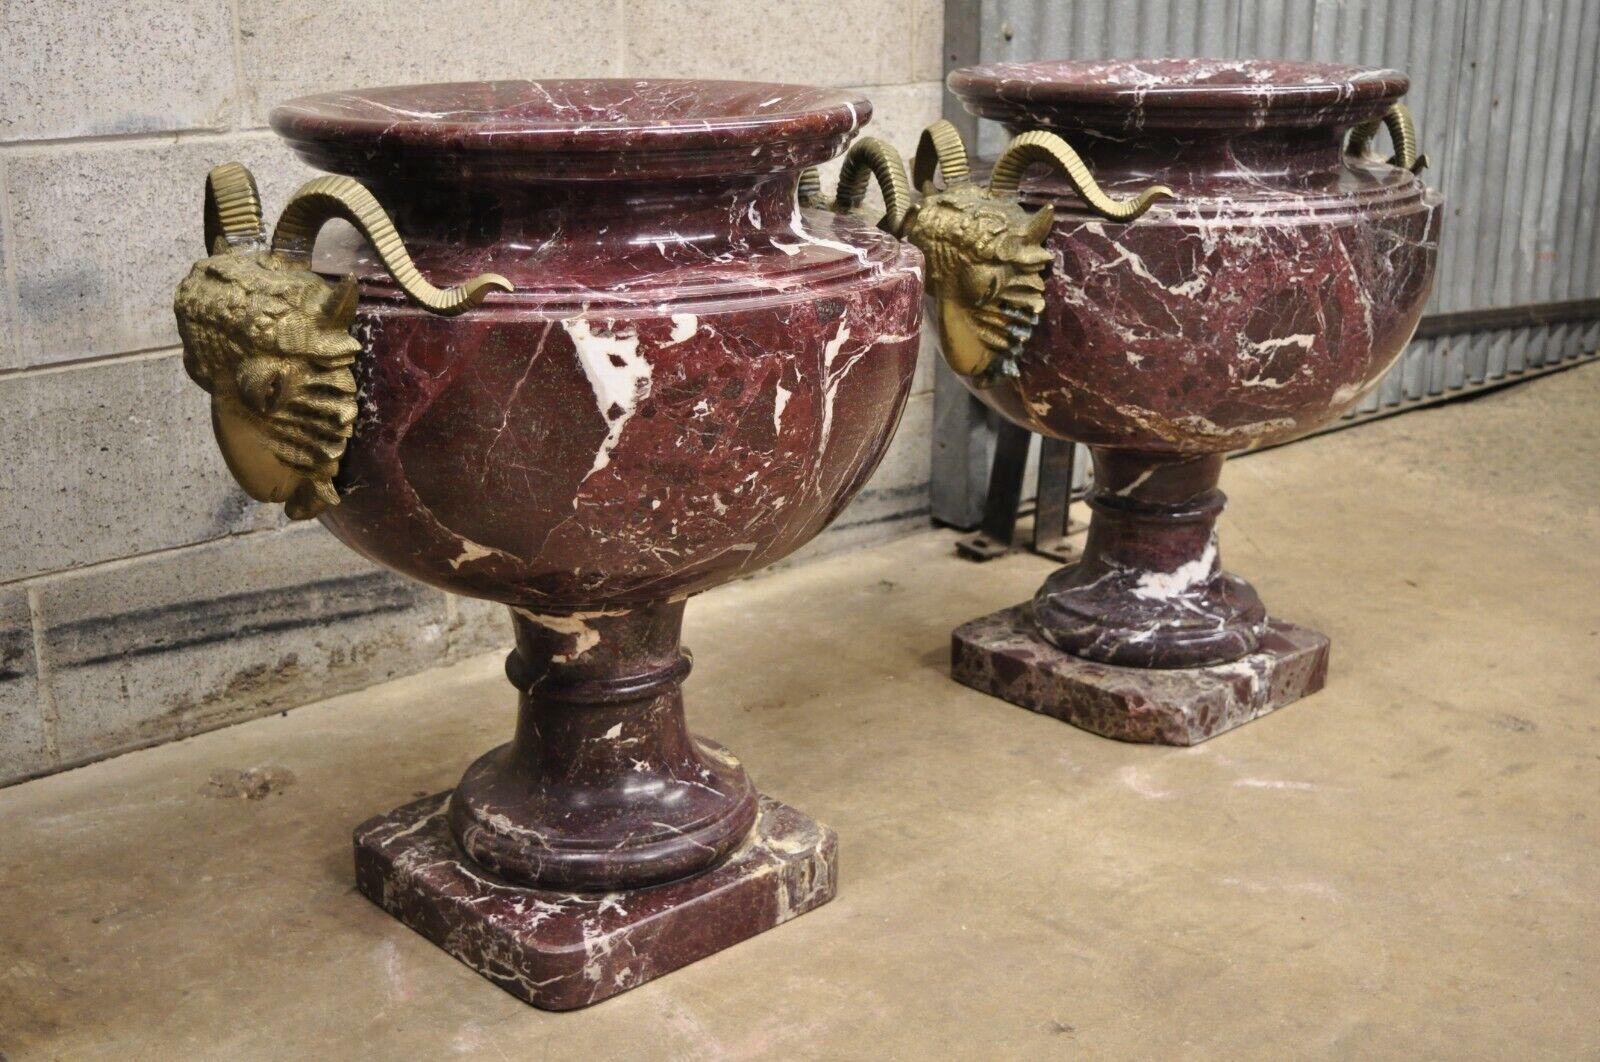 Large French Neoclassical Style Rouge Marble Bronze Rams Head Urn Planters - a Pair. Item features a large impressive size, bronze rams head handles, carved marble urn form, beautiful rouge marble, very nice vintage pair, great style and form,